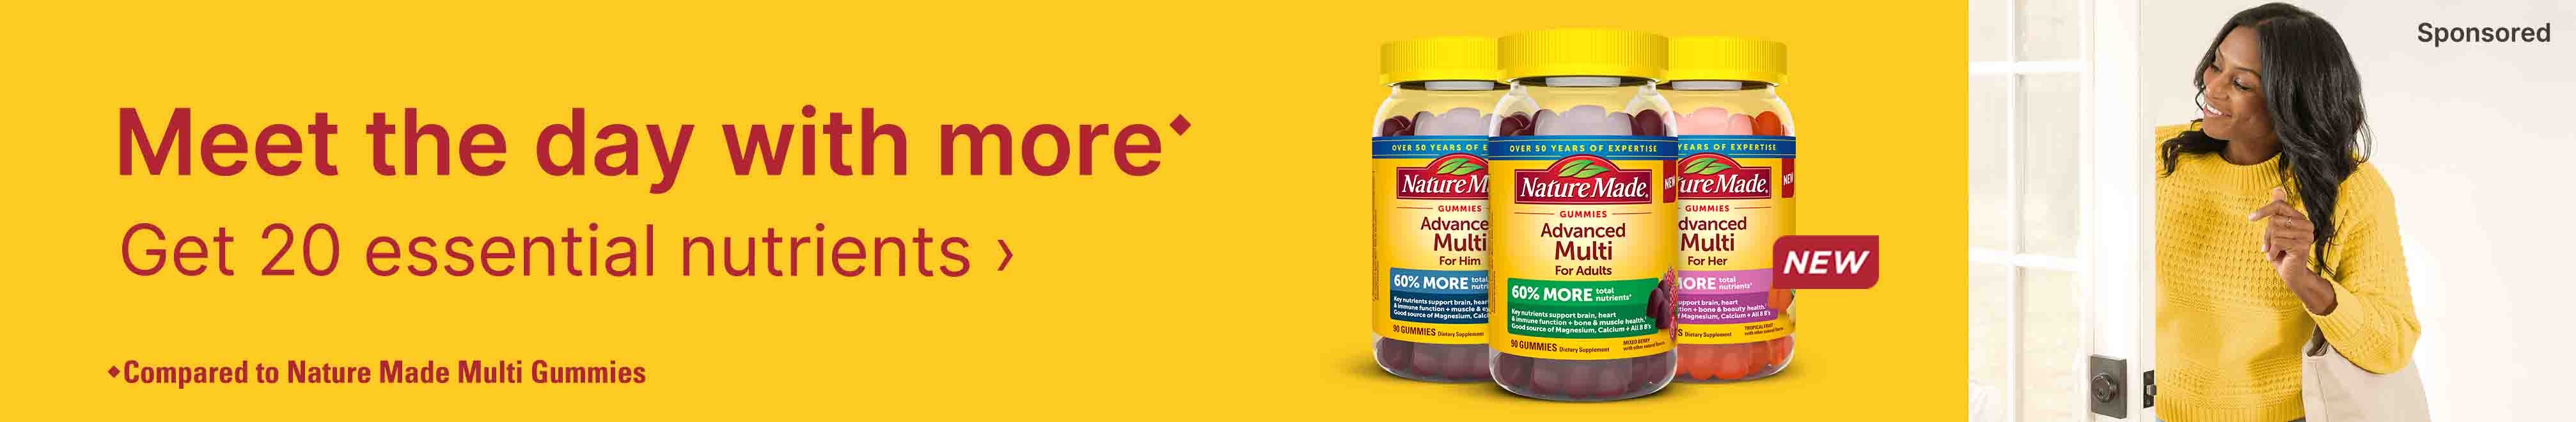 Meet the day with more. Get 20 essential nutrients. Compared to Nature Made Multi Gummies. Sponsored.